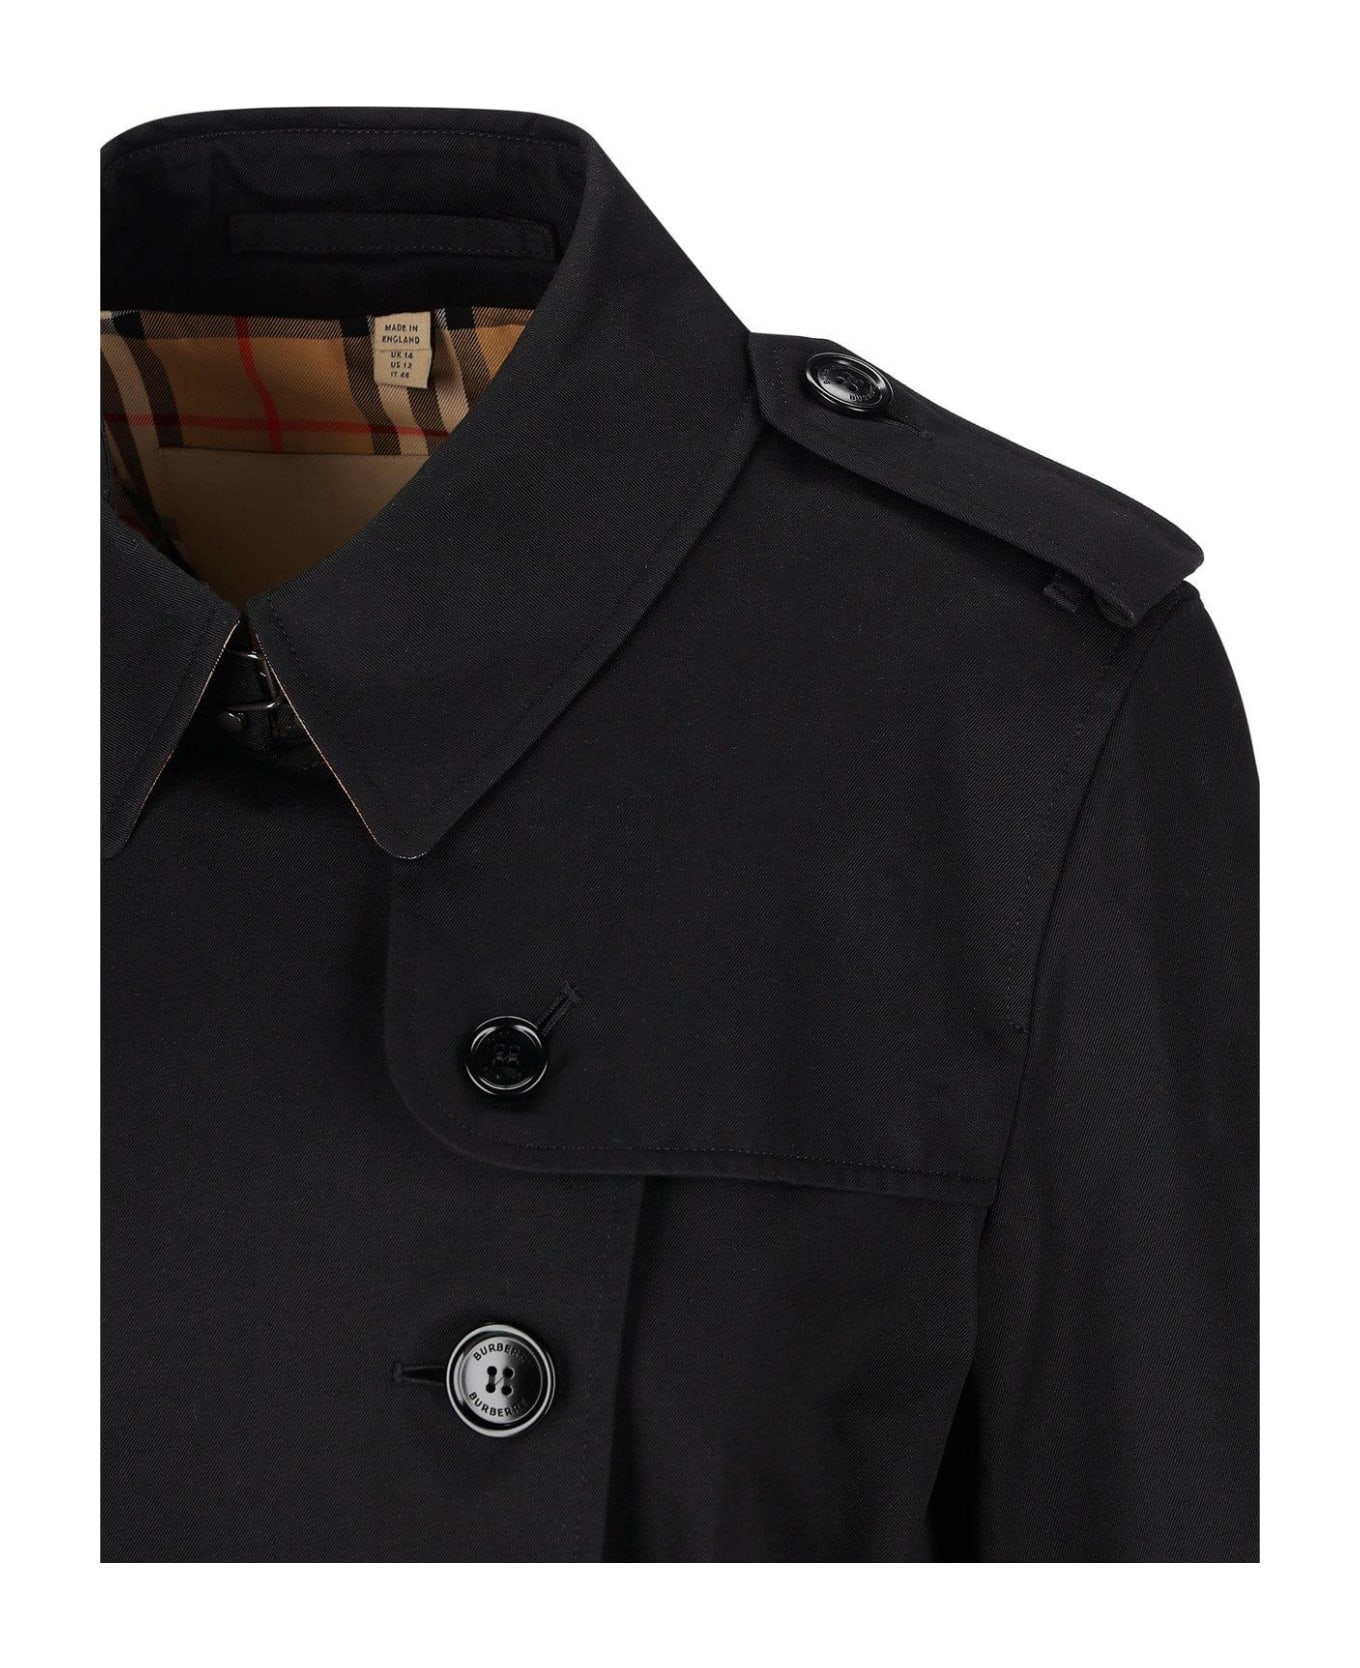 Burberry Double Breasted Belted Trench Coat - BLACK